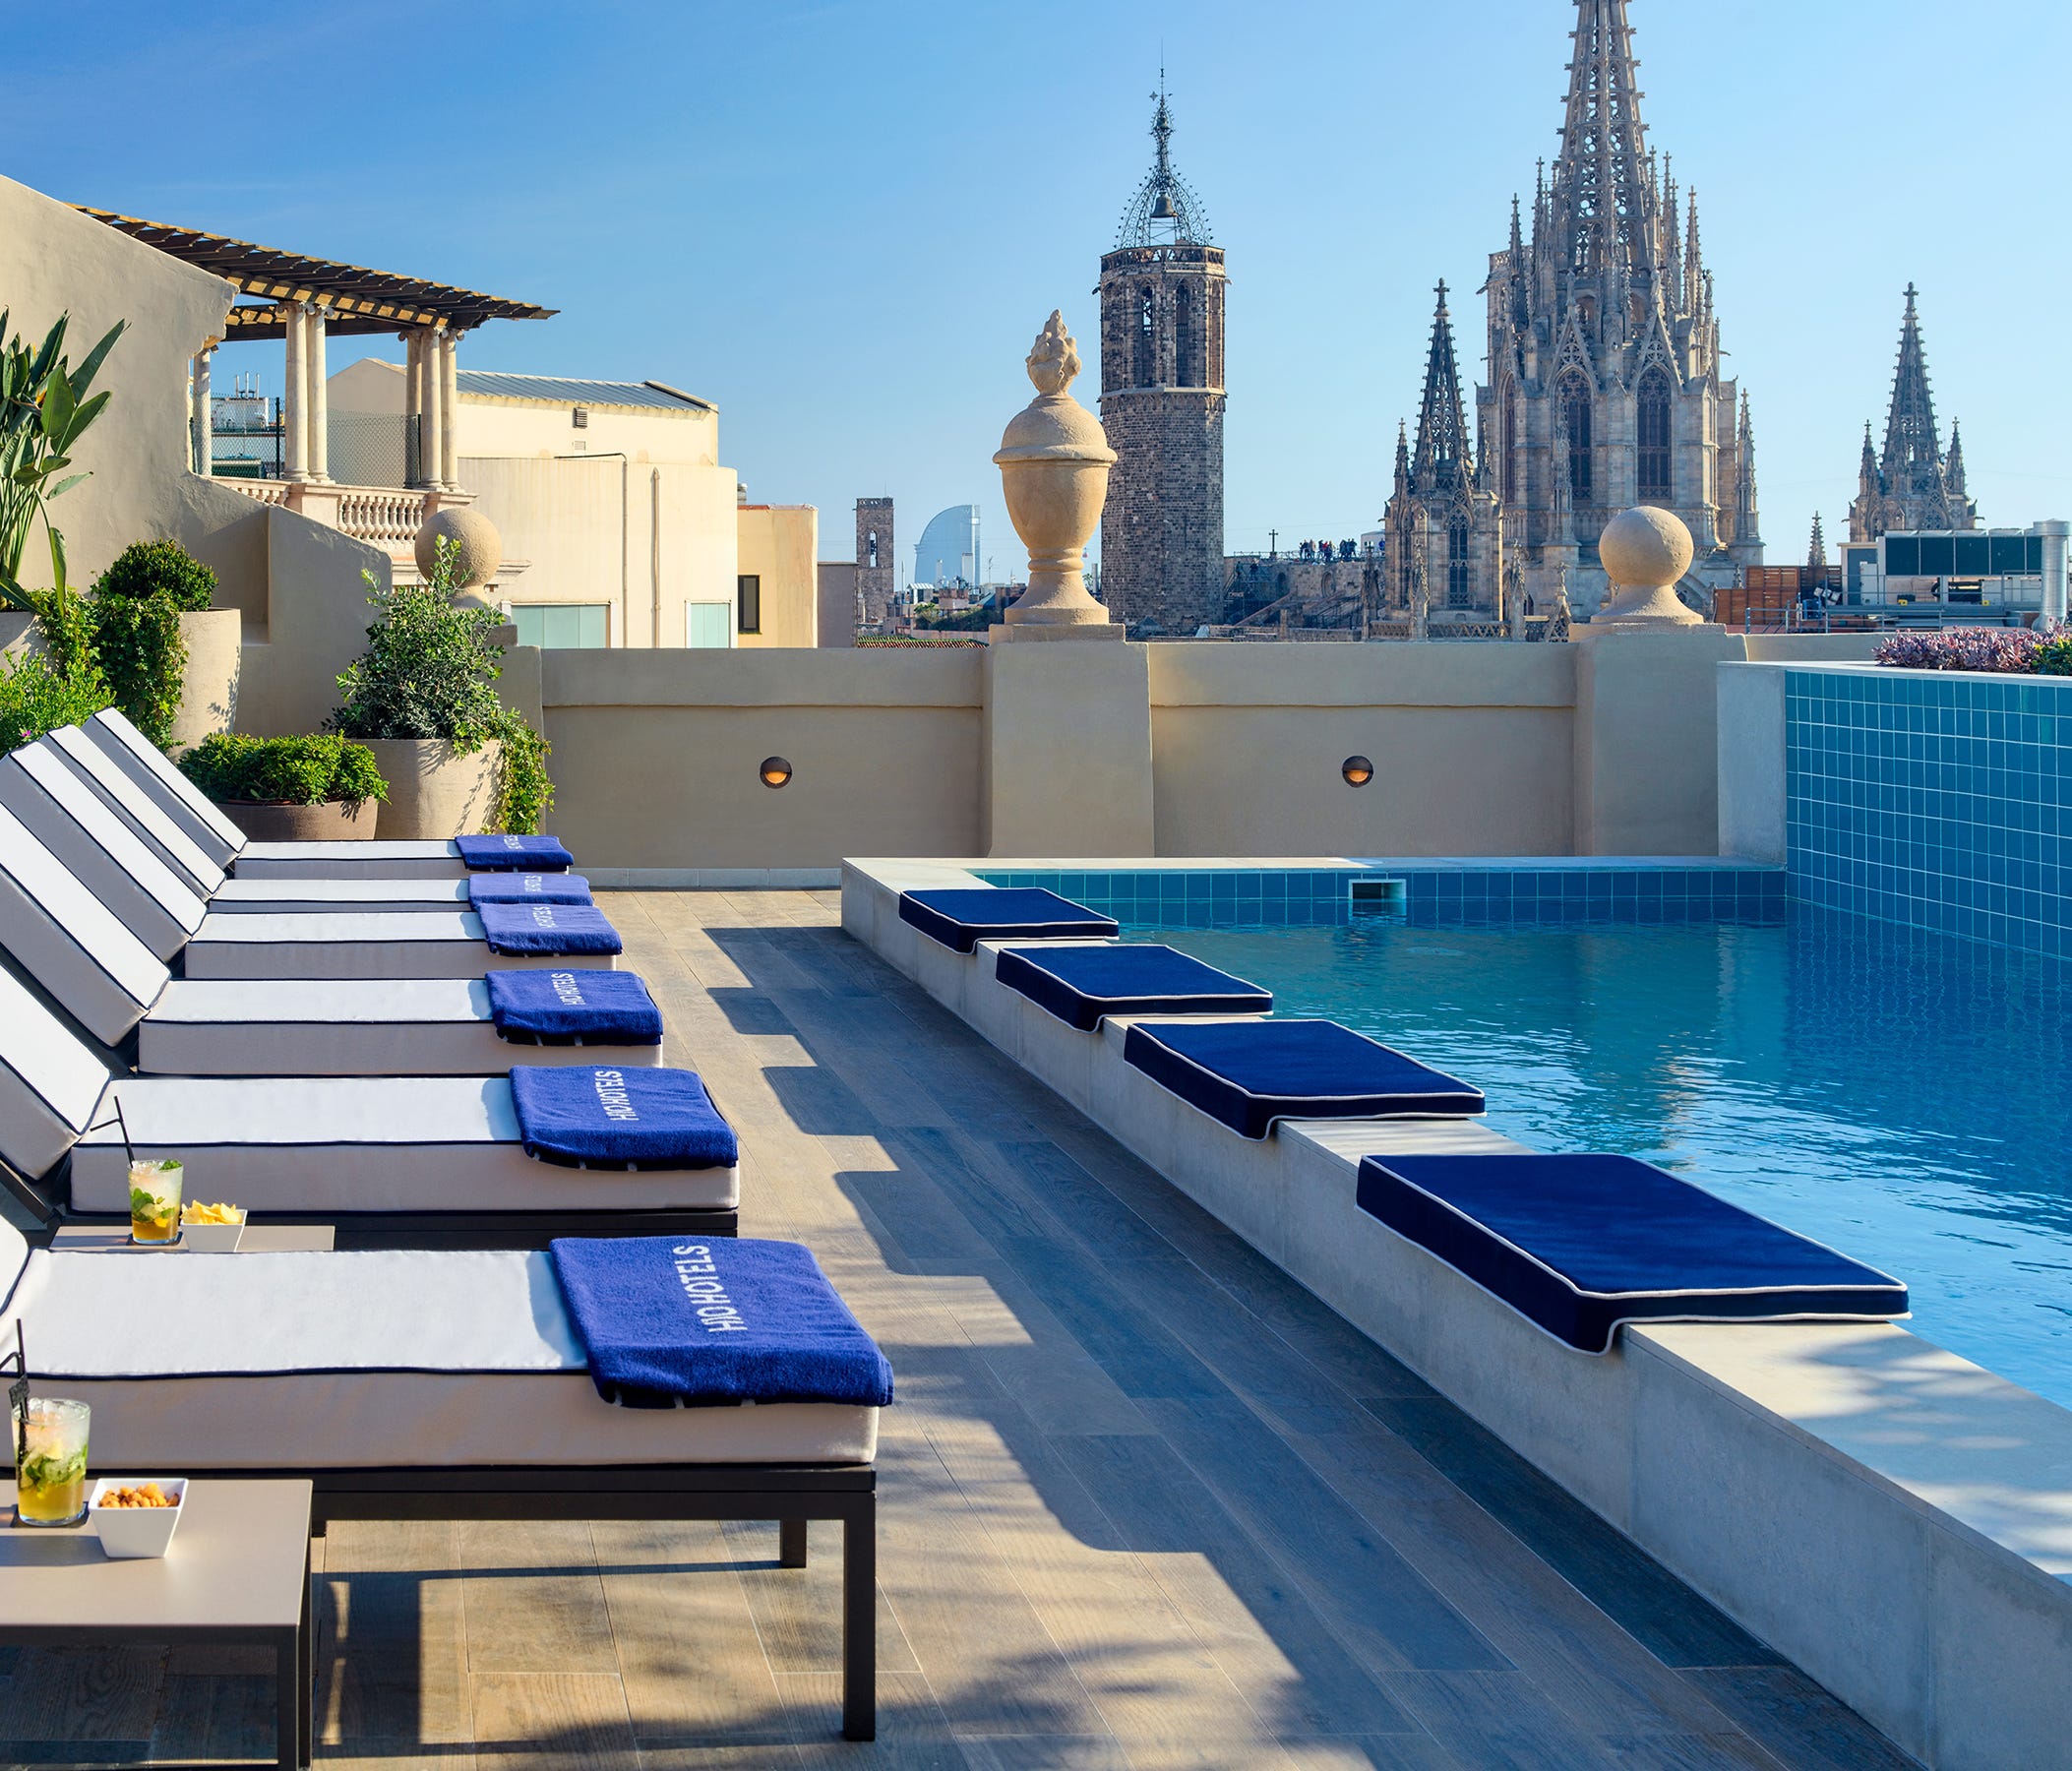 The H10 Madison in Barcelona (HotelTonight category: Luxe) showed rates as low as $176 in mid-August.